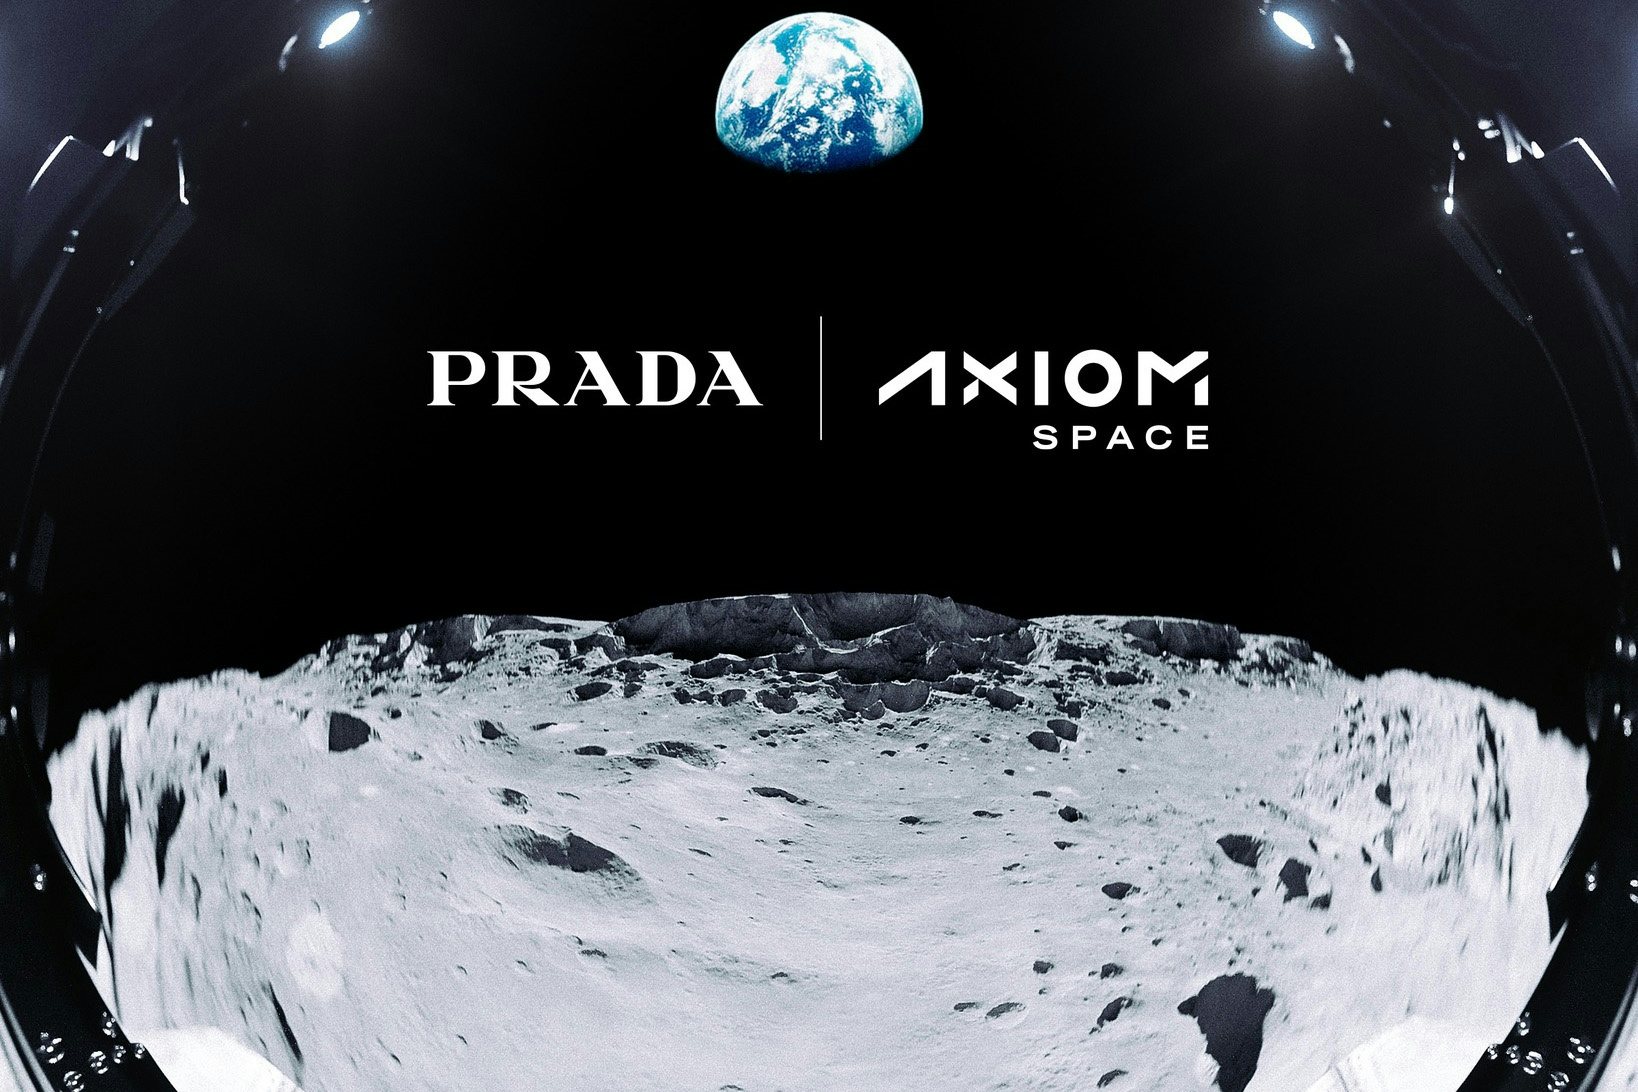 Prada is collaborating with Axiom on spacesuits for the 2025 mission. Photo: Prada x Axiom Space